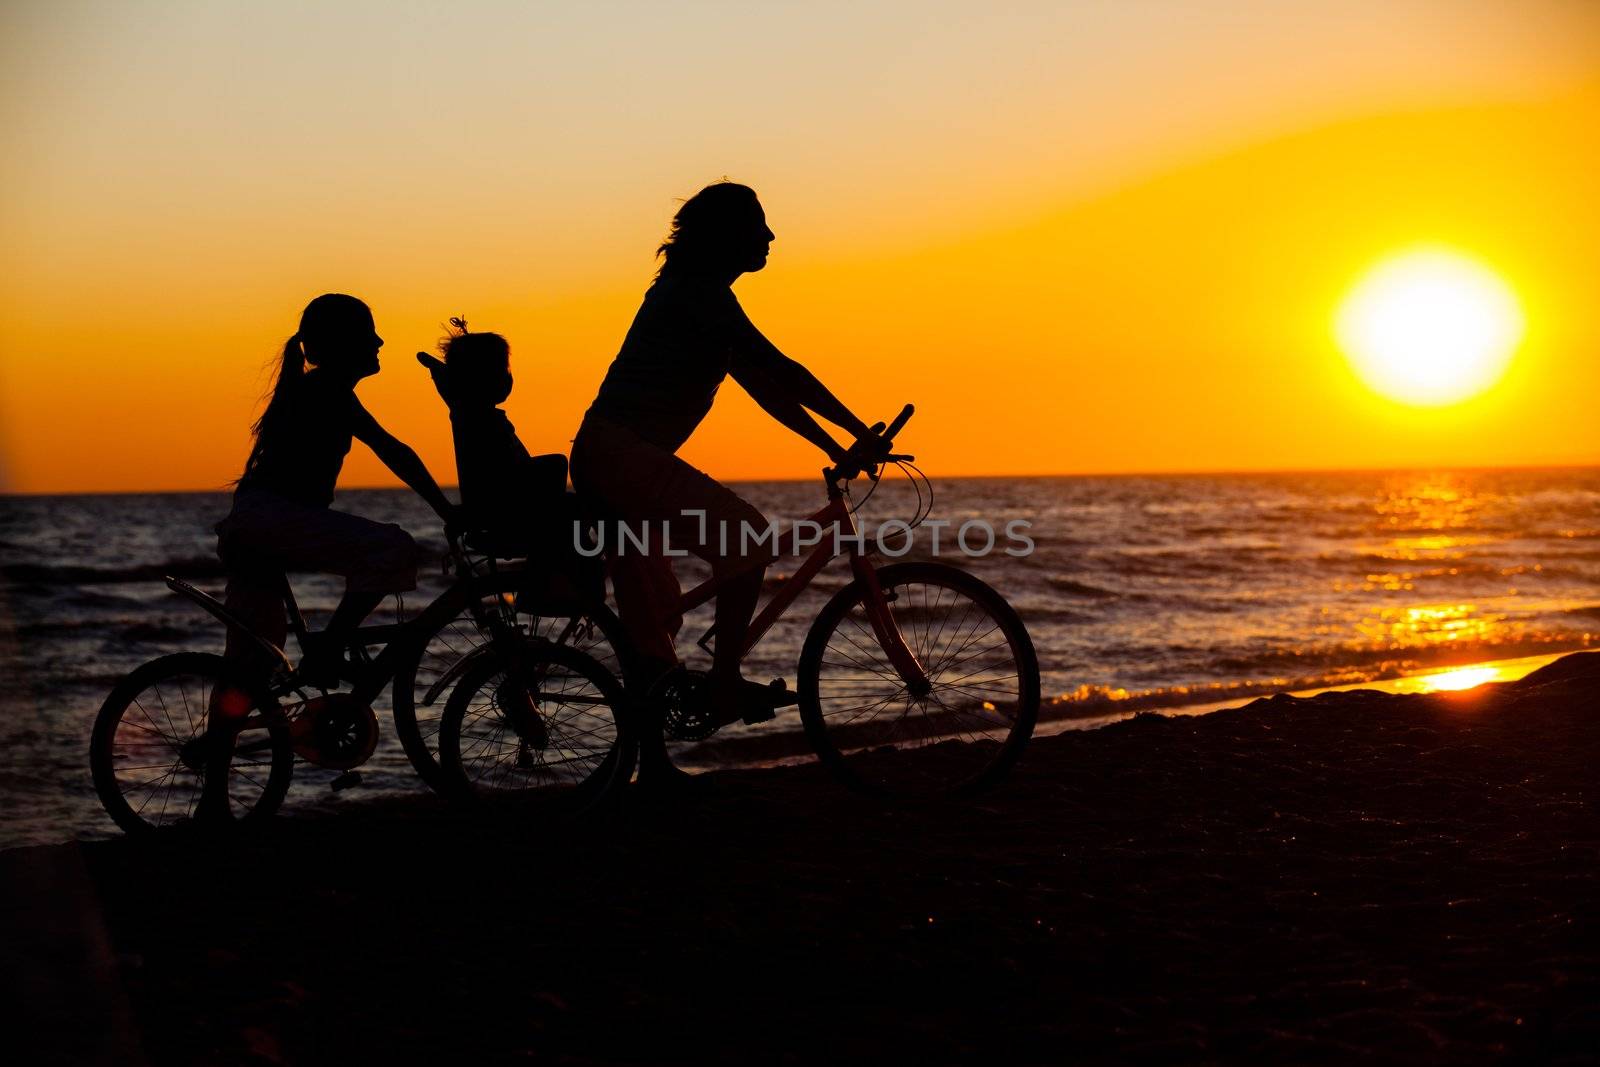 Mother and her kids on the bicycle silhouettes on beach at sunset